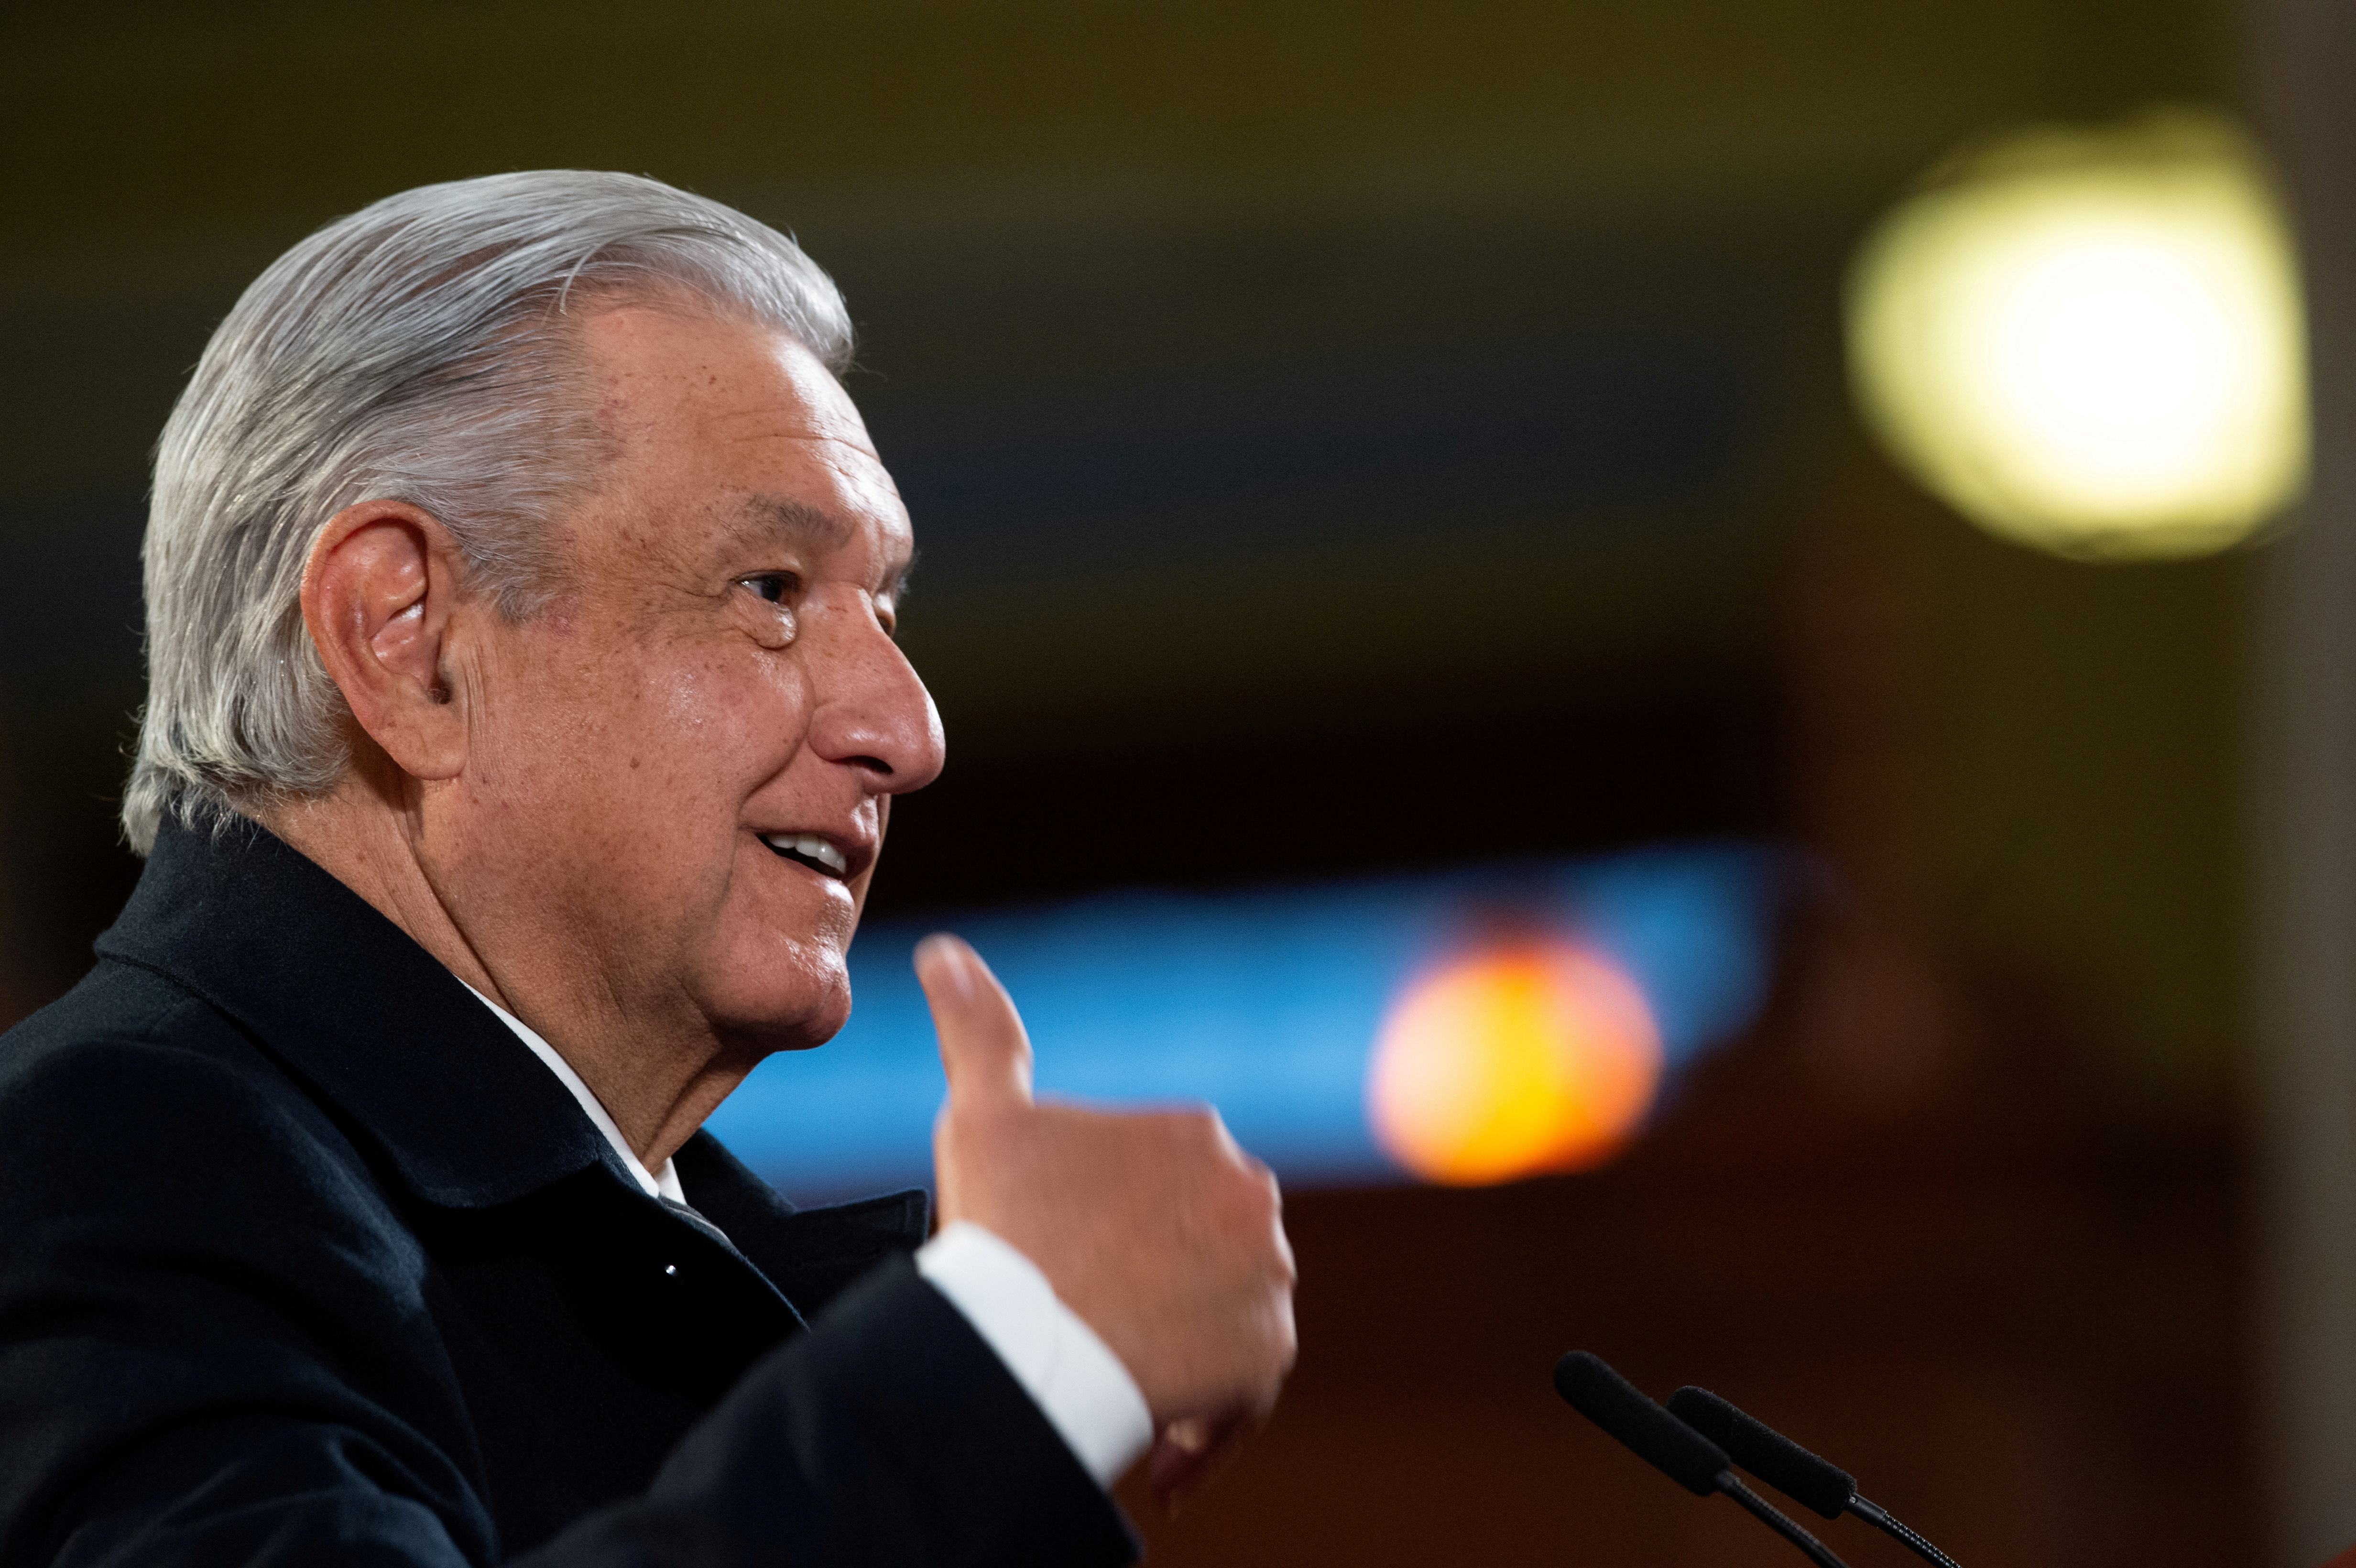 Mexico's President Andres Manuel Lopez Obrador holds a news conference at the National Palace in Mexico City